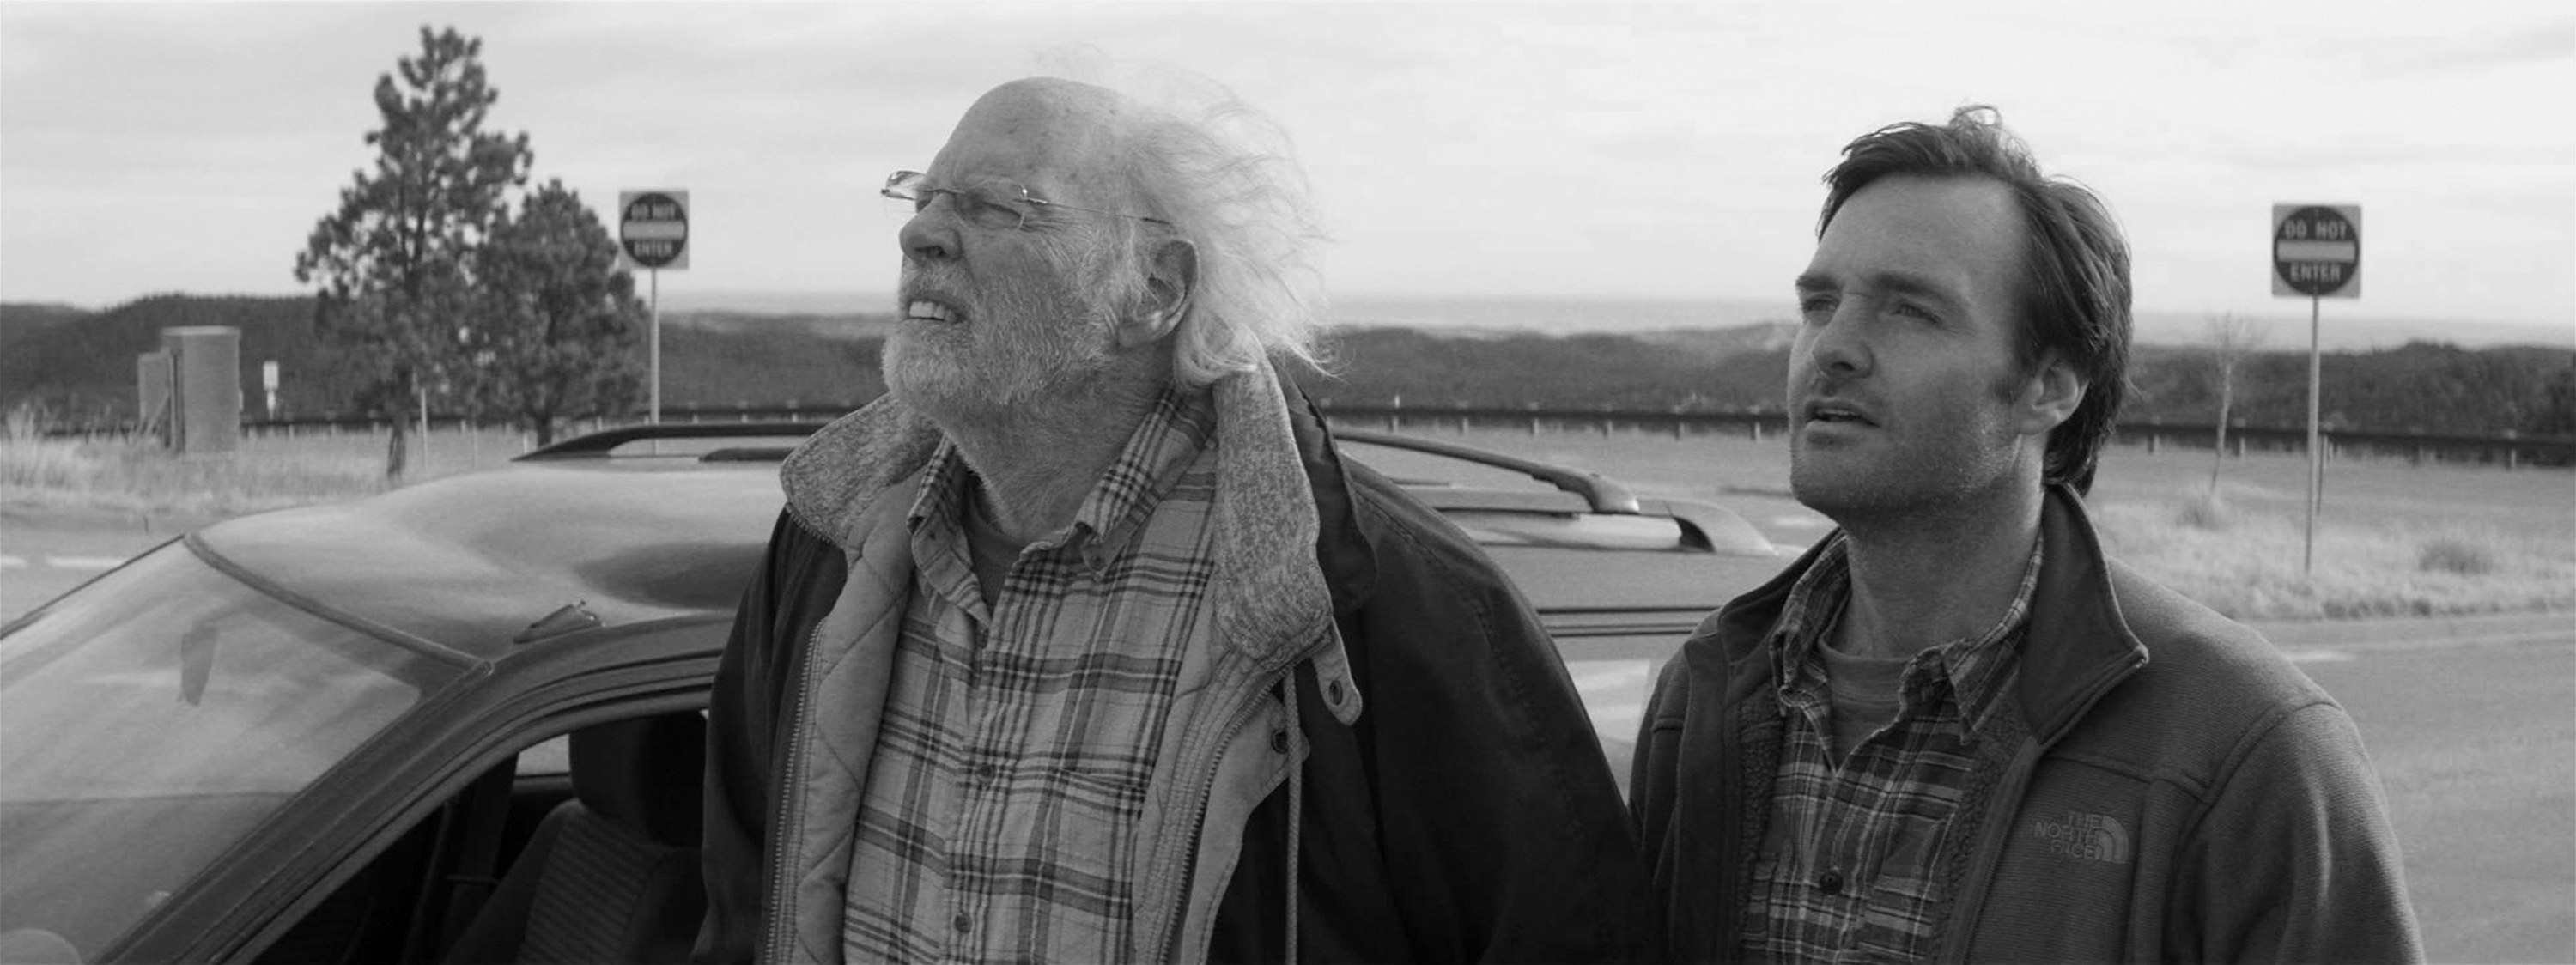 Bruce Dern and Will Forte stand in a parking lot in black and white